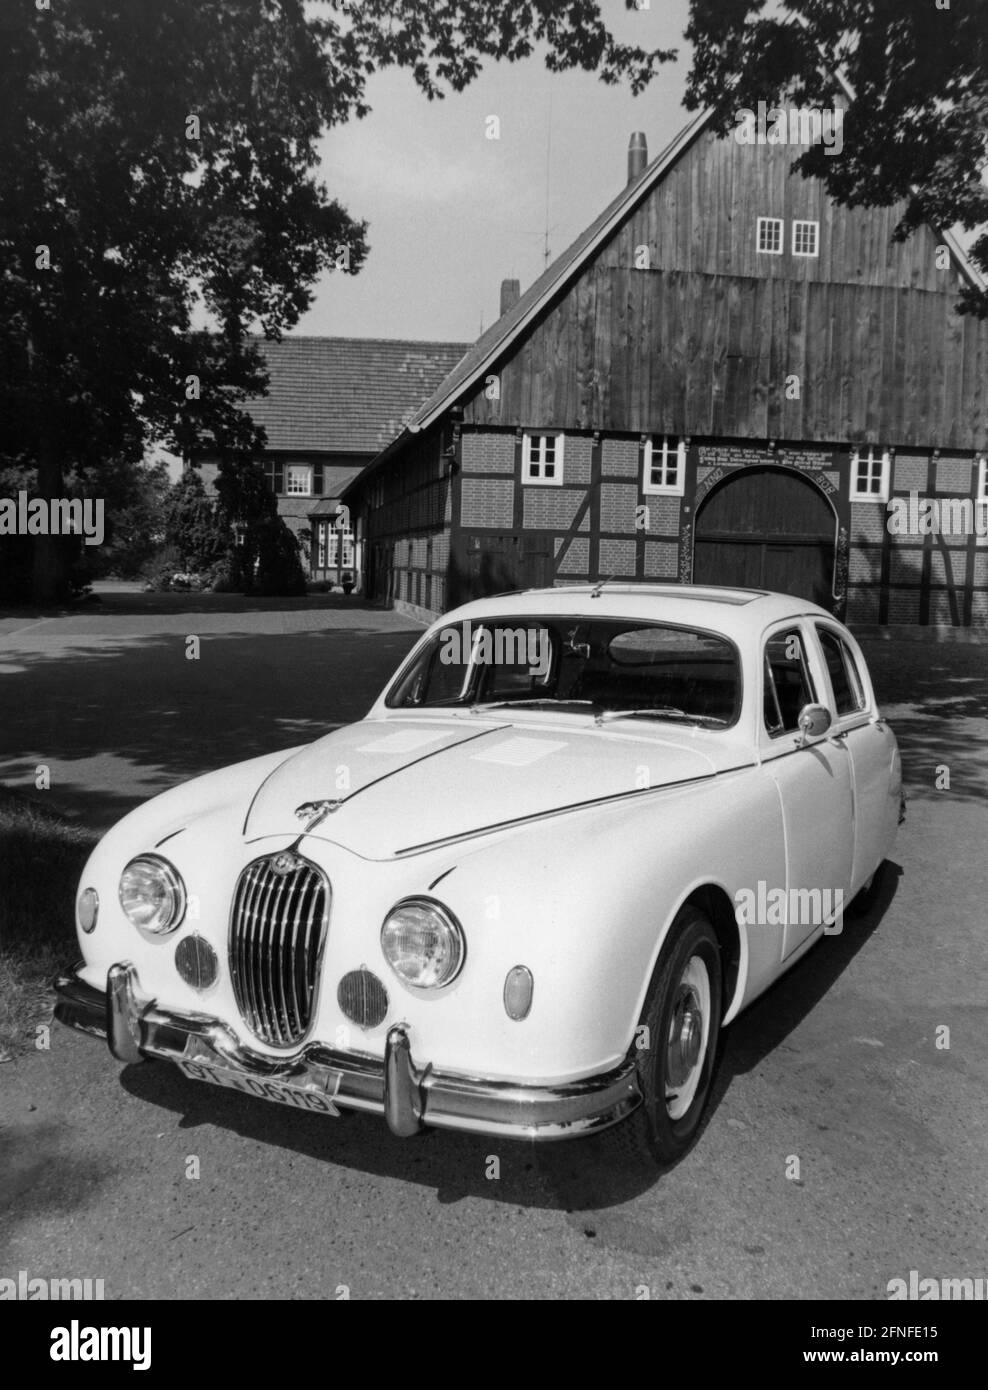 'This photo shows the Jaguar MK1, an English sports car that Heinz Rühmann used to own. Rühmann also drove this type of car in his film ''Quax, der Bruchpilot''. [automated translation]' Stock Photo